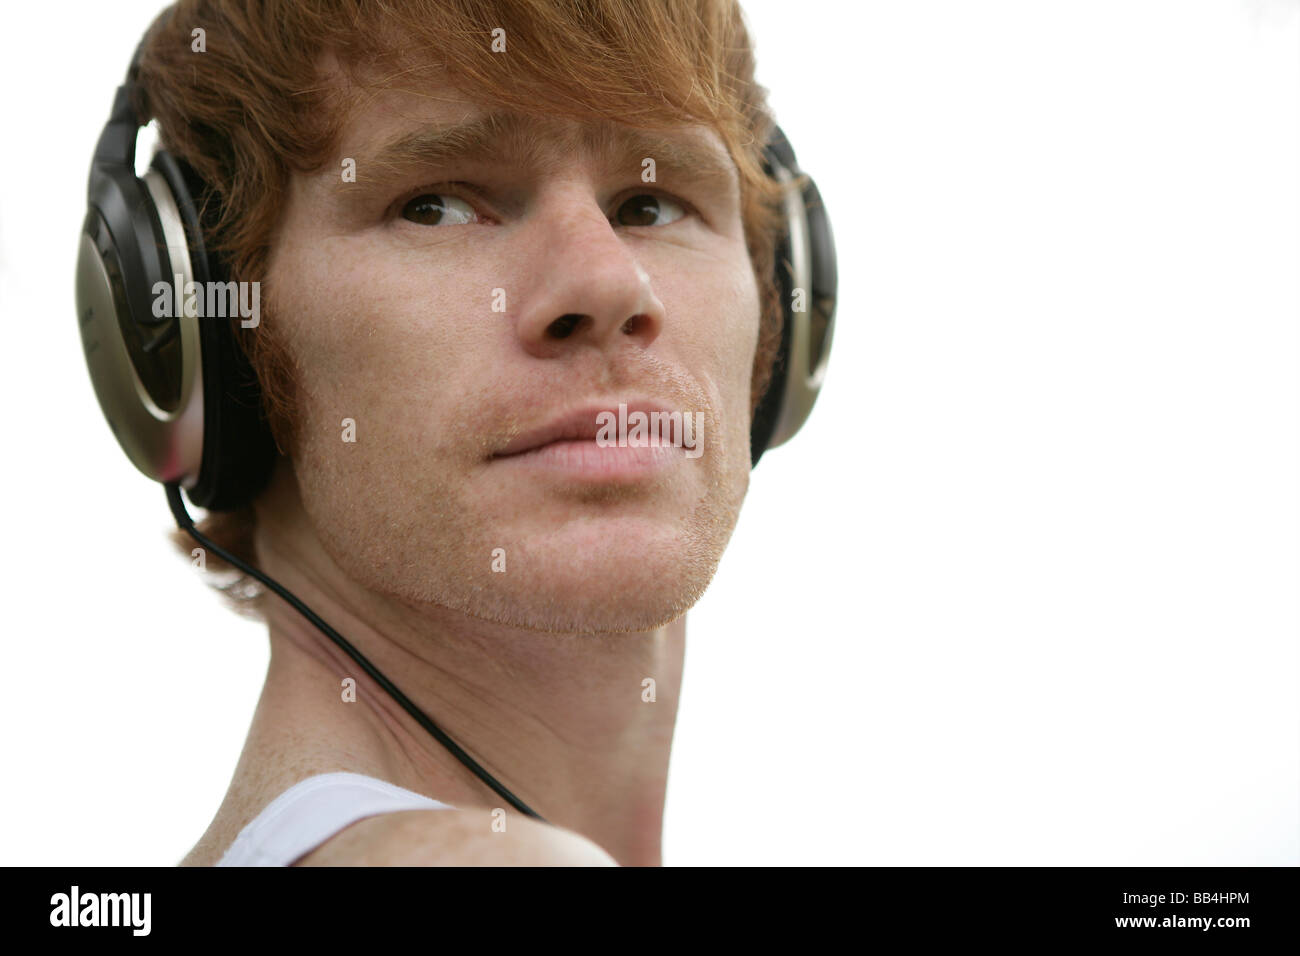 Portrait of of young man with headphone Stock Photo